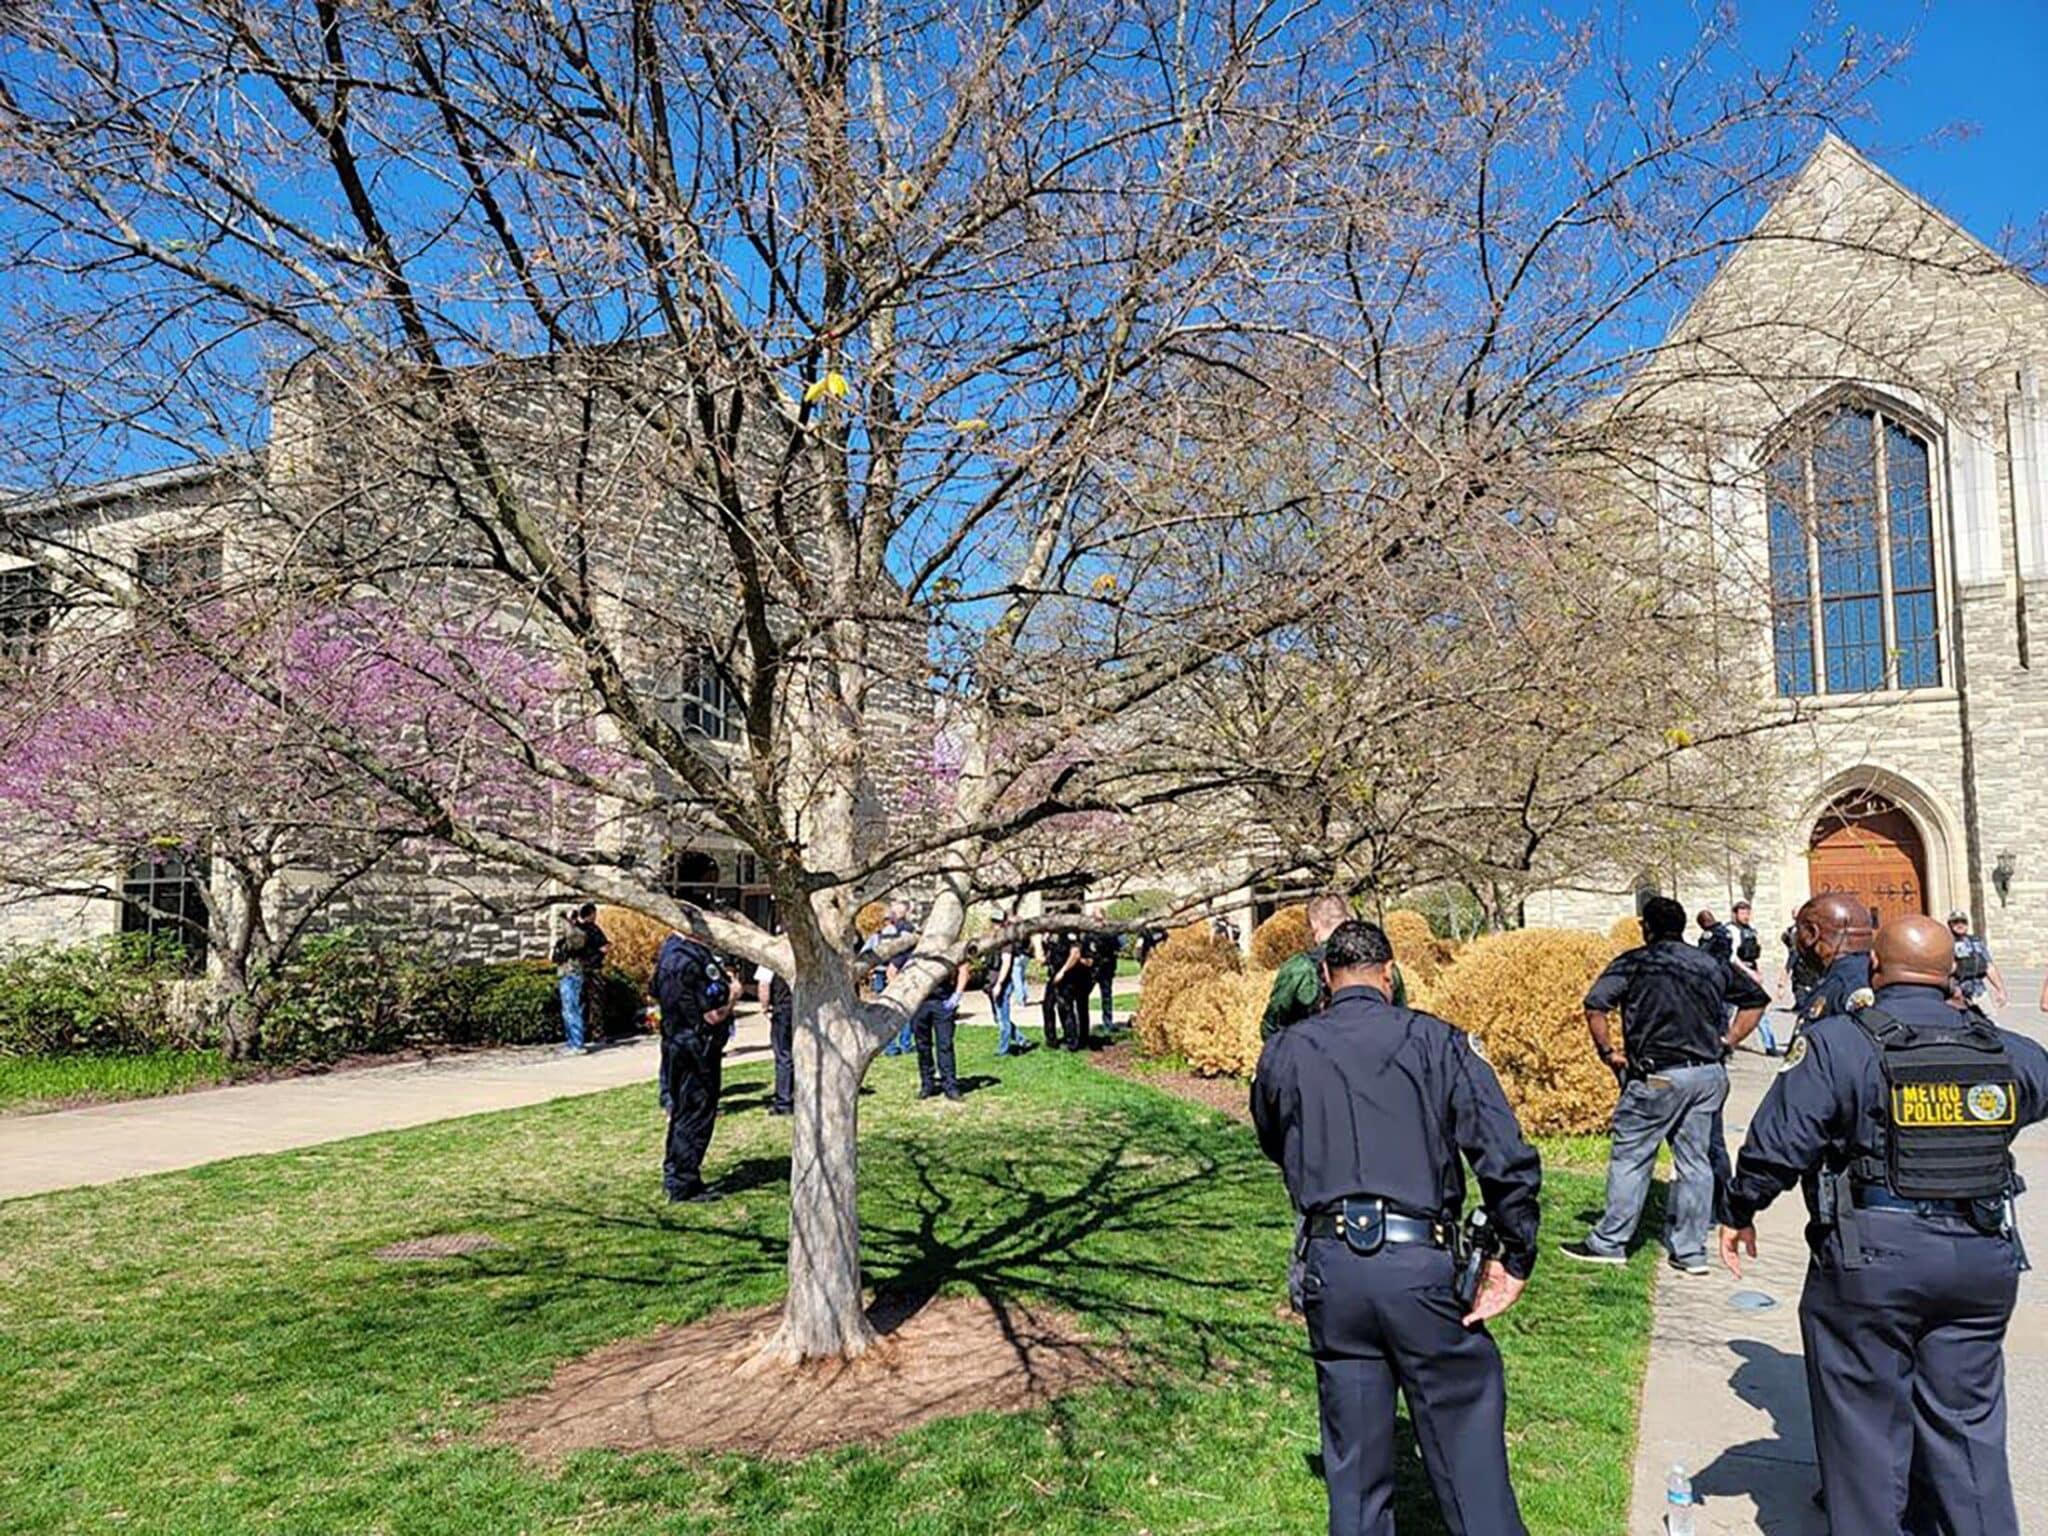 Police officers arrive at the Covenant School on the grounds of Covenant Presbyterian Church in Nashville, Tenn., after reports of a shooting at the school March 27, 2023. At least six were killed -- three adults and three children -- police reported. (OSV News photo/Metropolitan Nashville Police Department handout via Reuters) NO ARCHIVES. MUST DISCARD 30 DAYS AFTER DOWNLOAD.